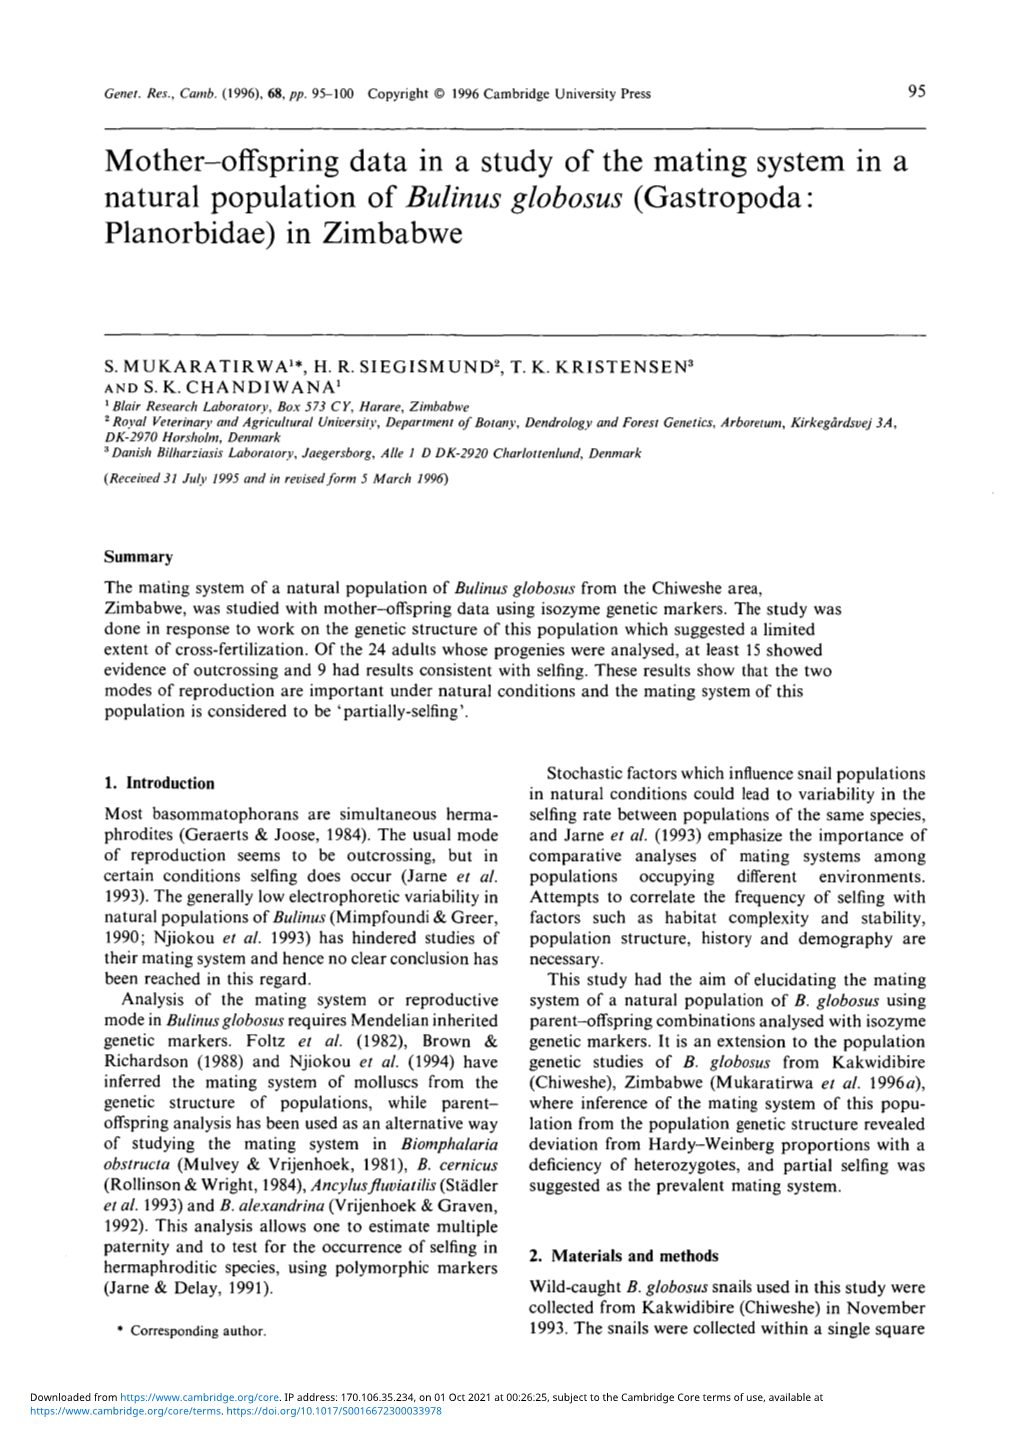 Mother-Offspring Data in a Study of the Mating System in a Natural Population of Bulinus Globosus (Gastropoda: Planorbidae) in Zimbabwe